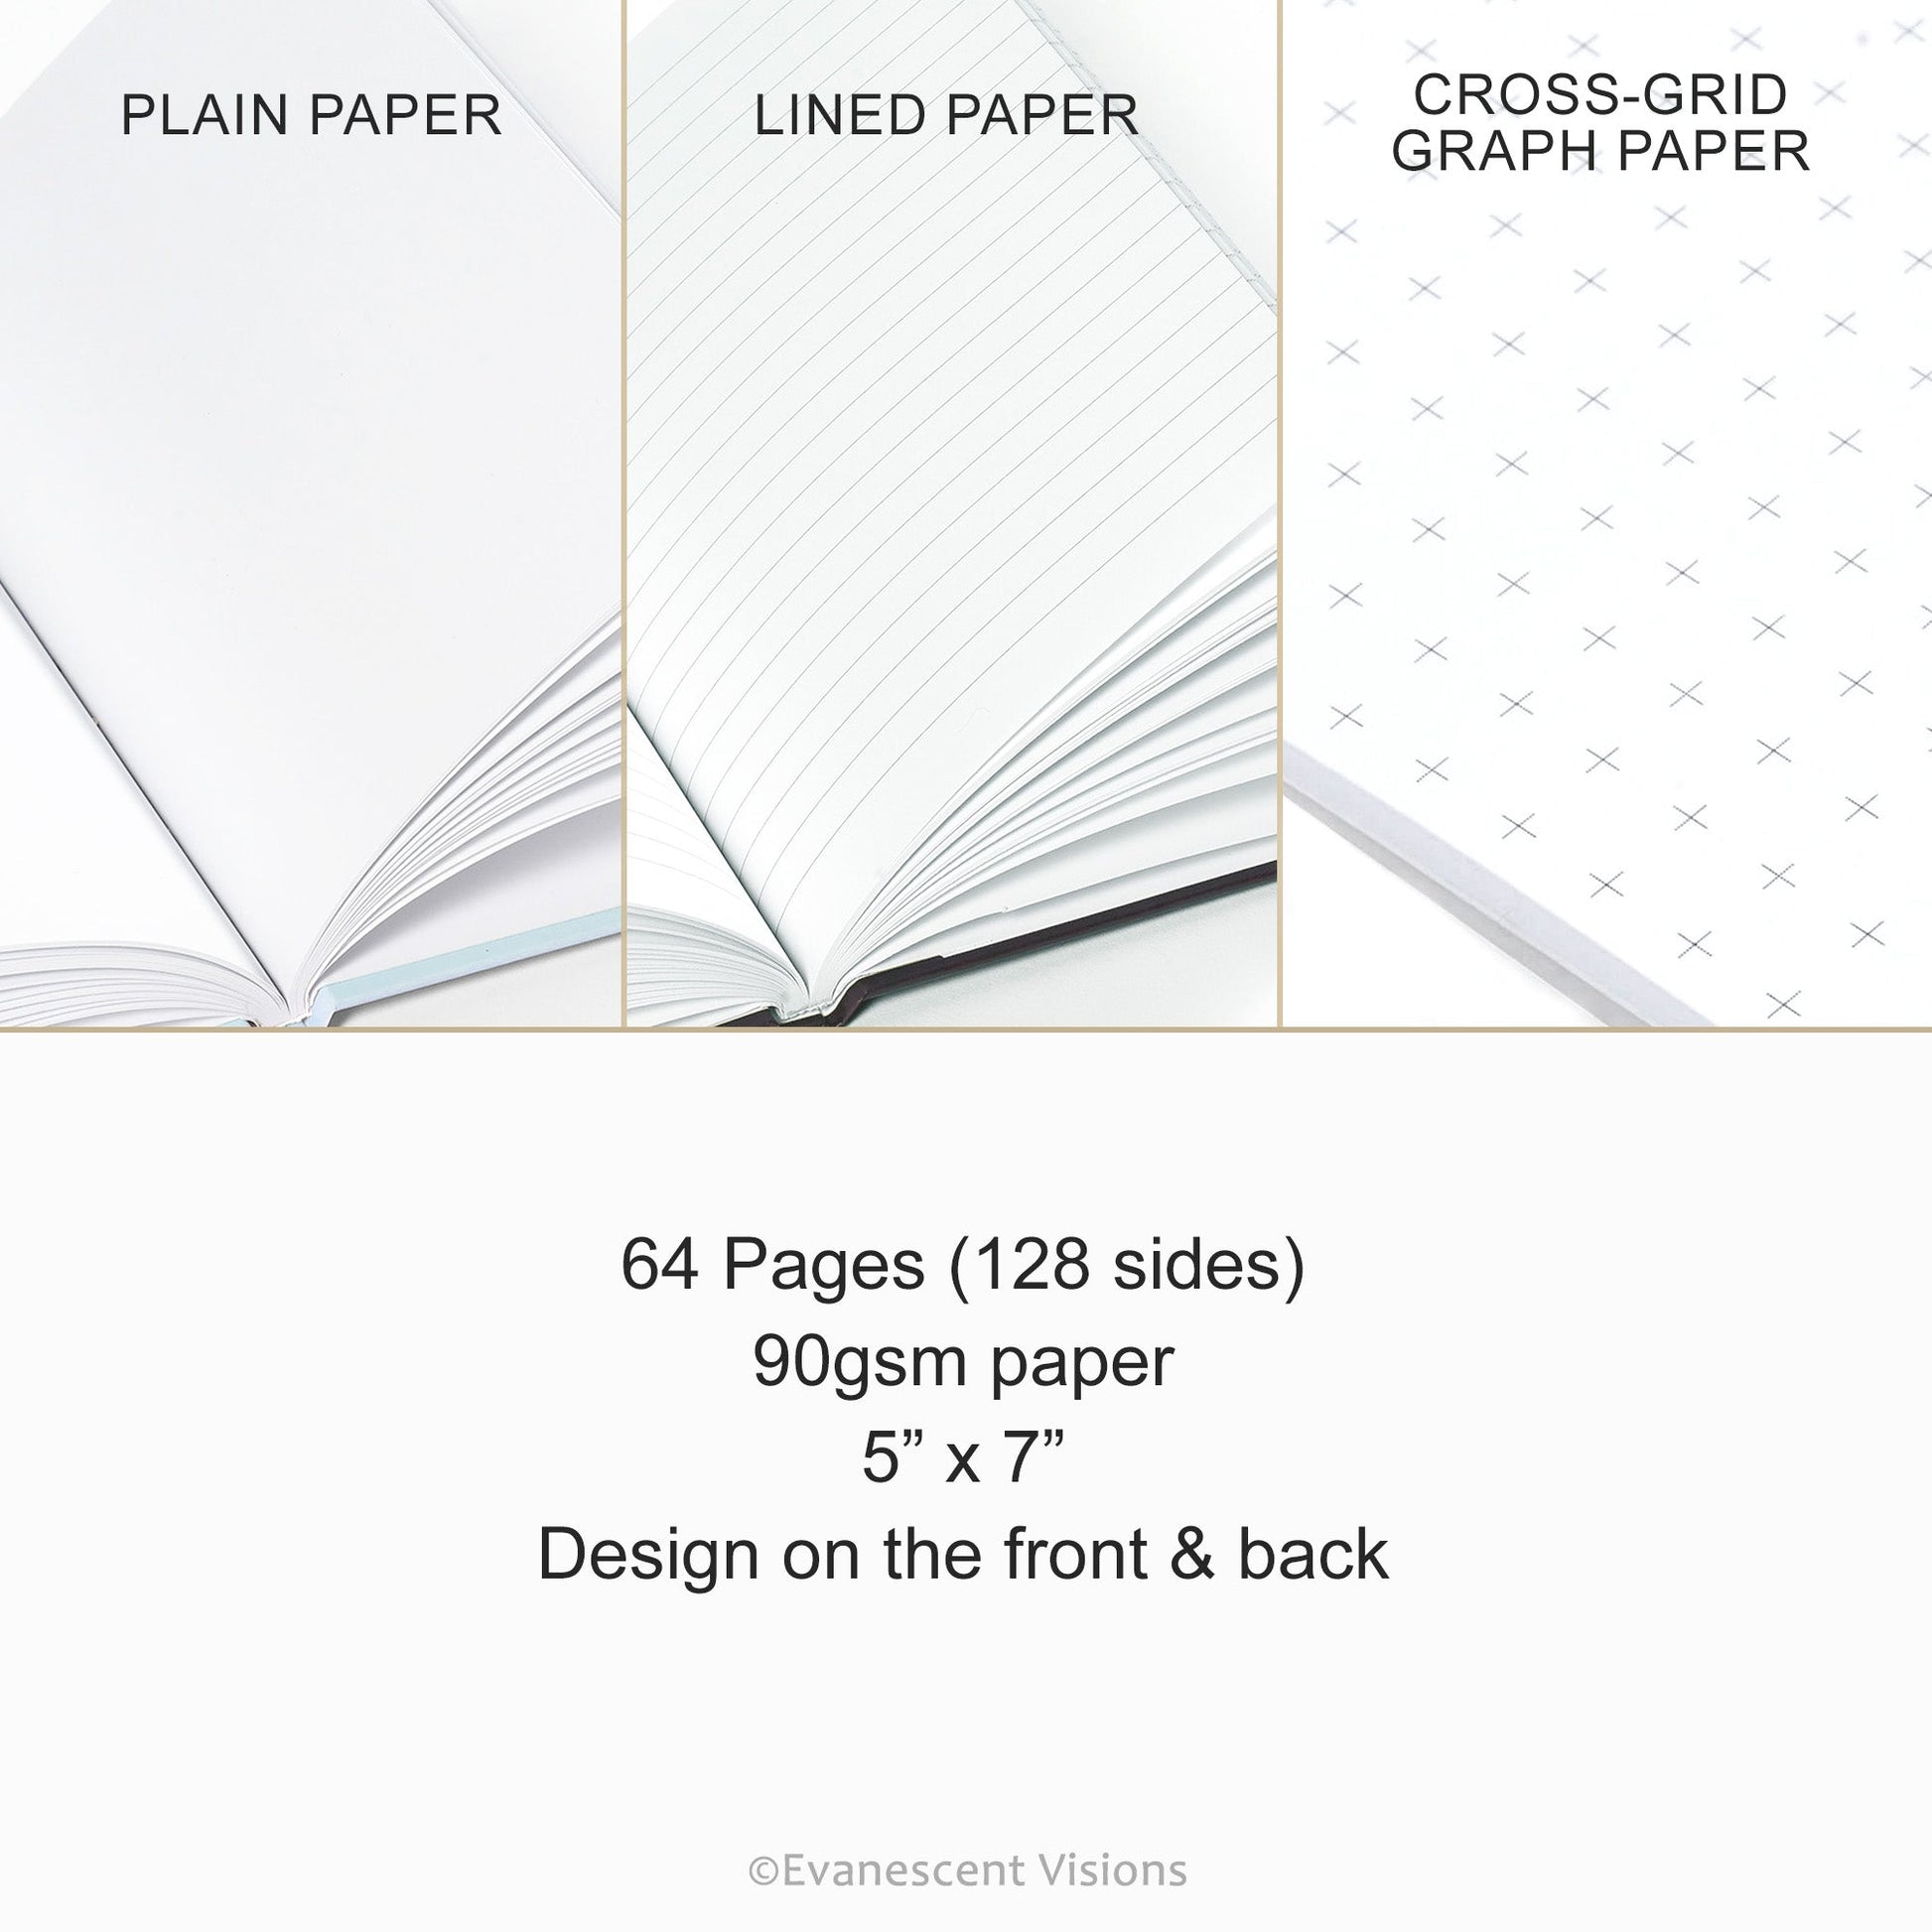 Paper options and details